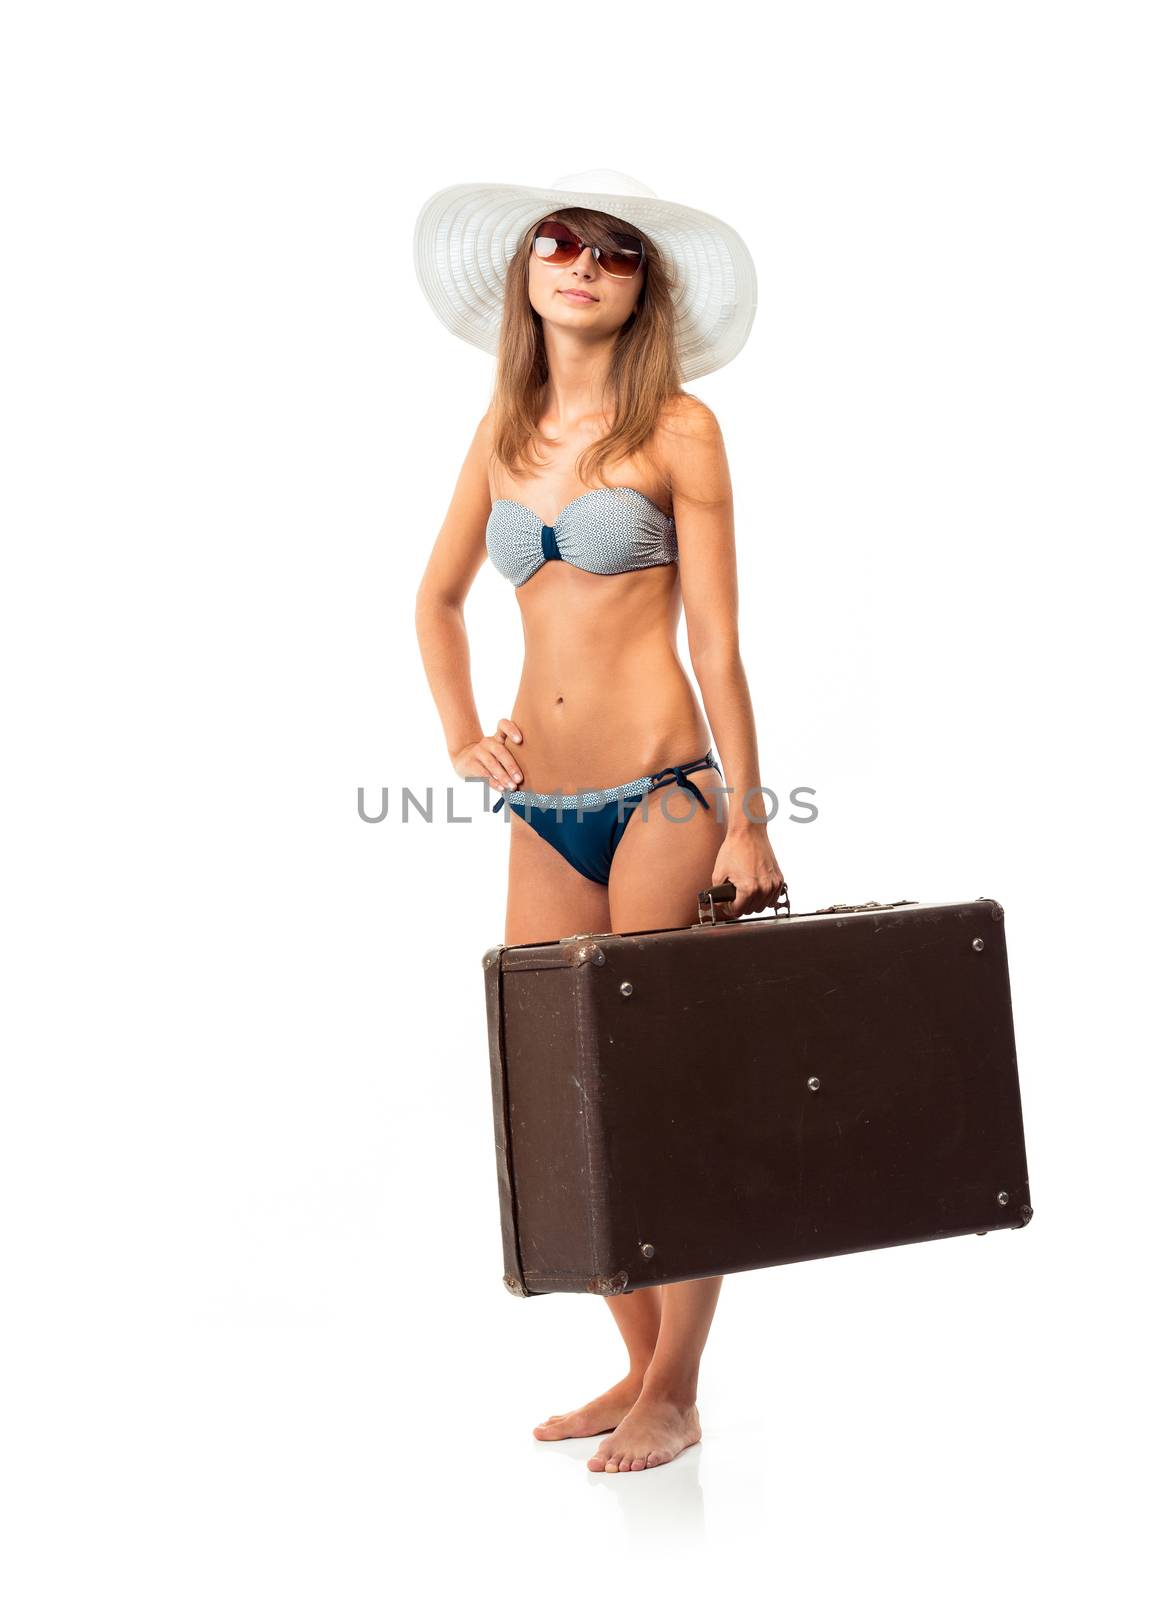 Full length portrait of a beautiful young woman posing in a bikini, hat and sunglasses with a suitcase in hand on white background